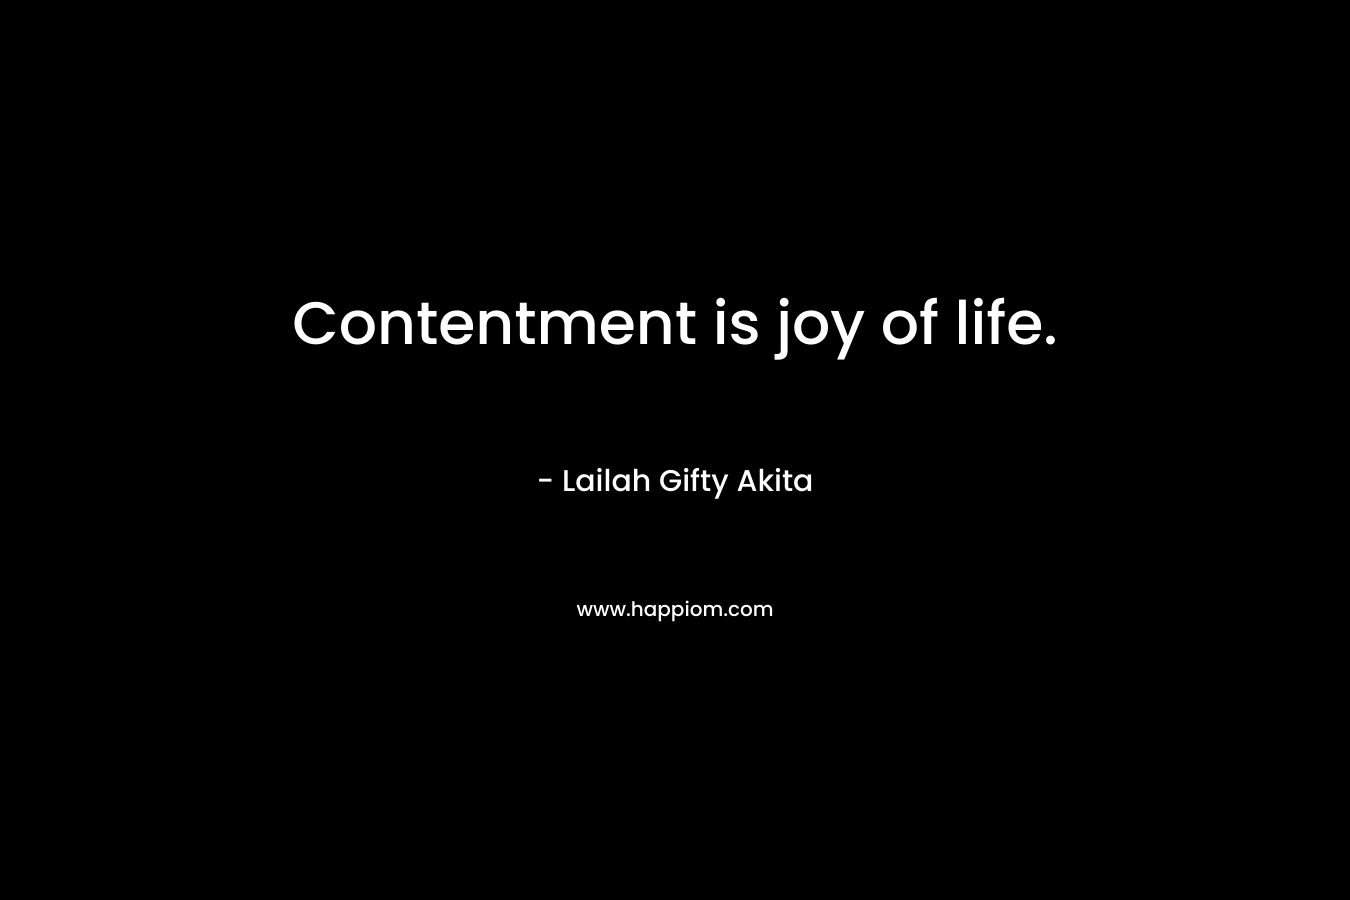 Contentment is joy of life.